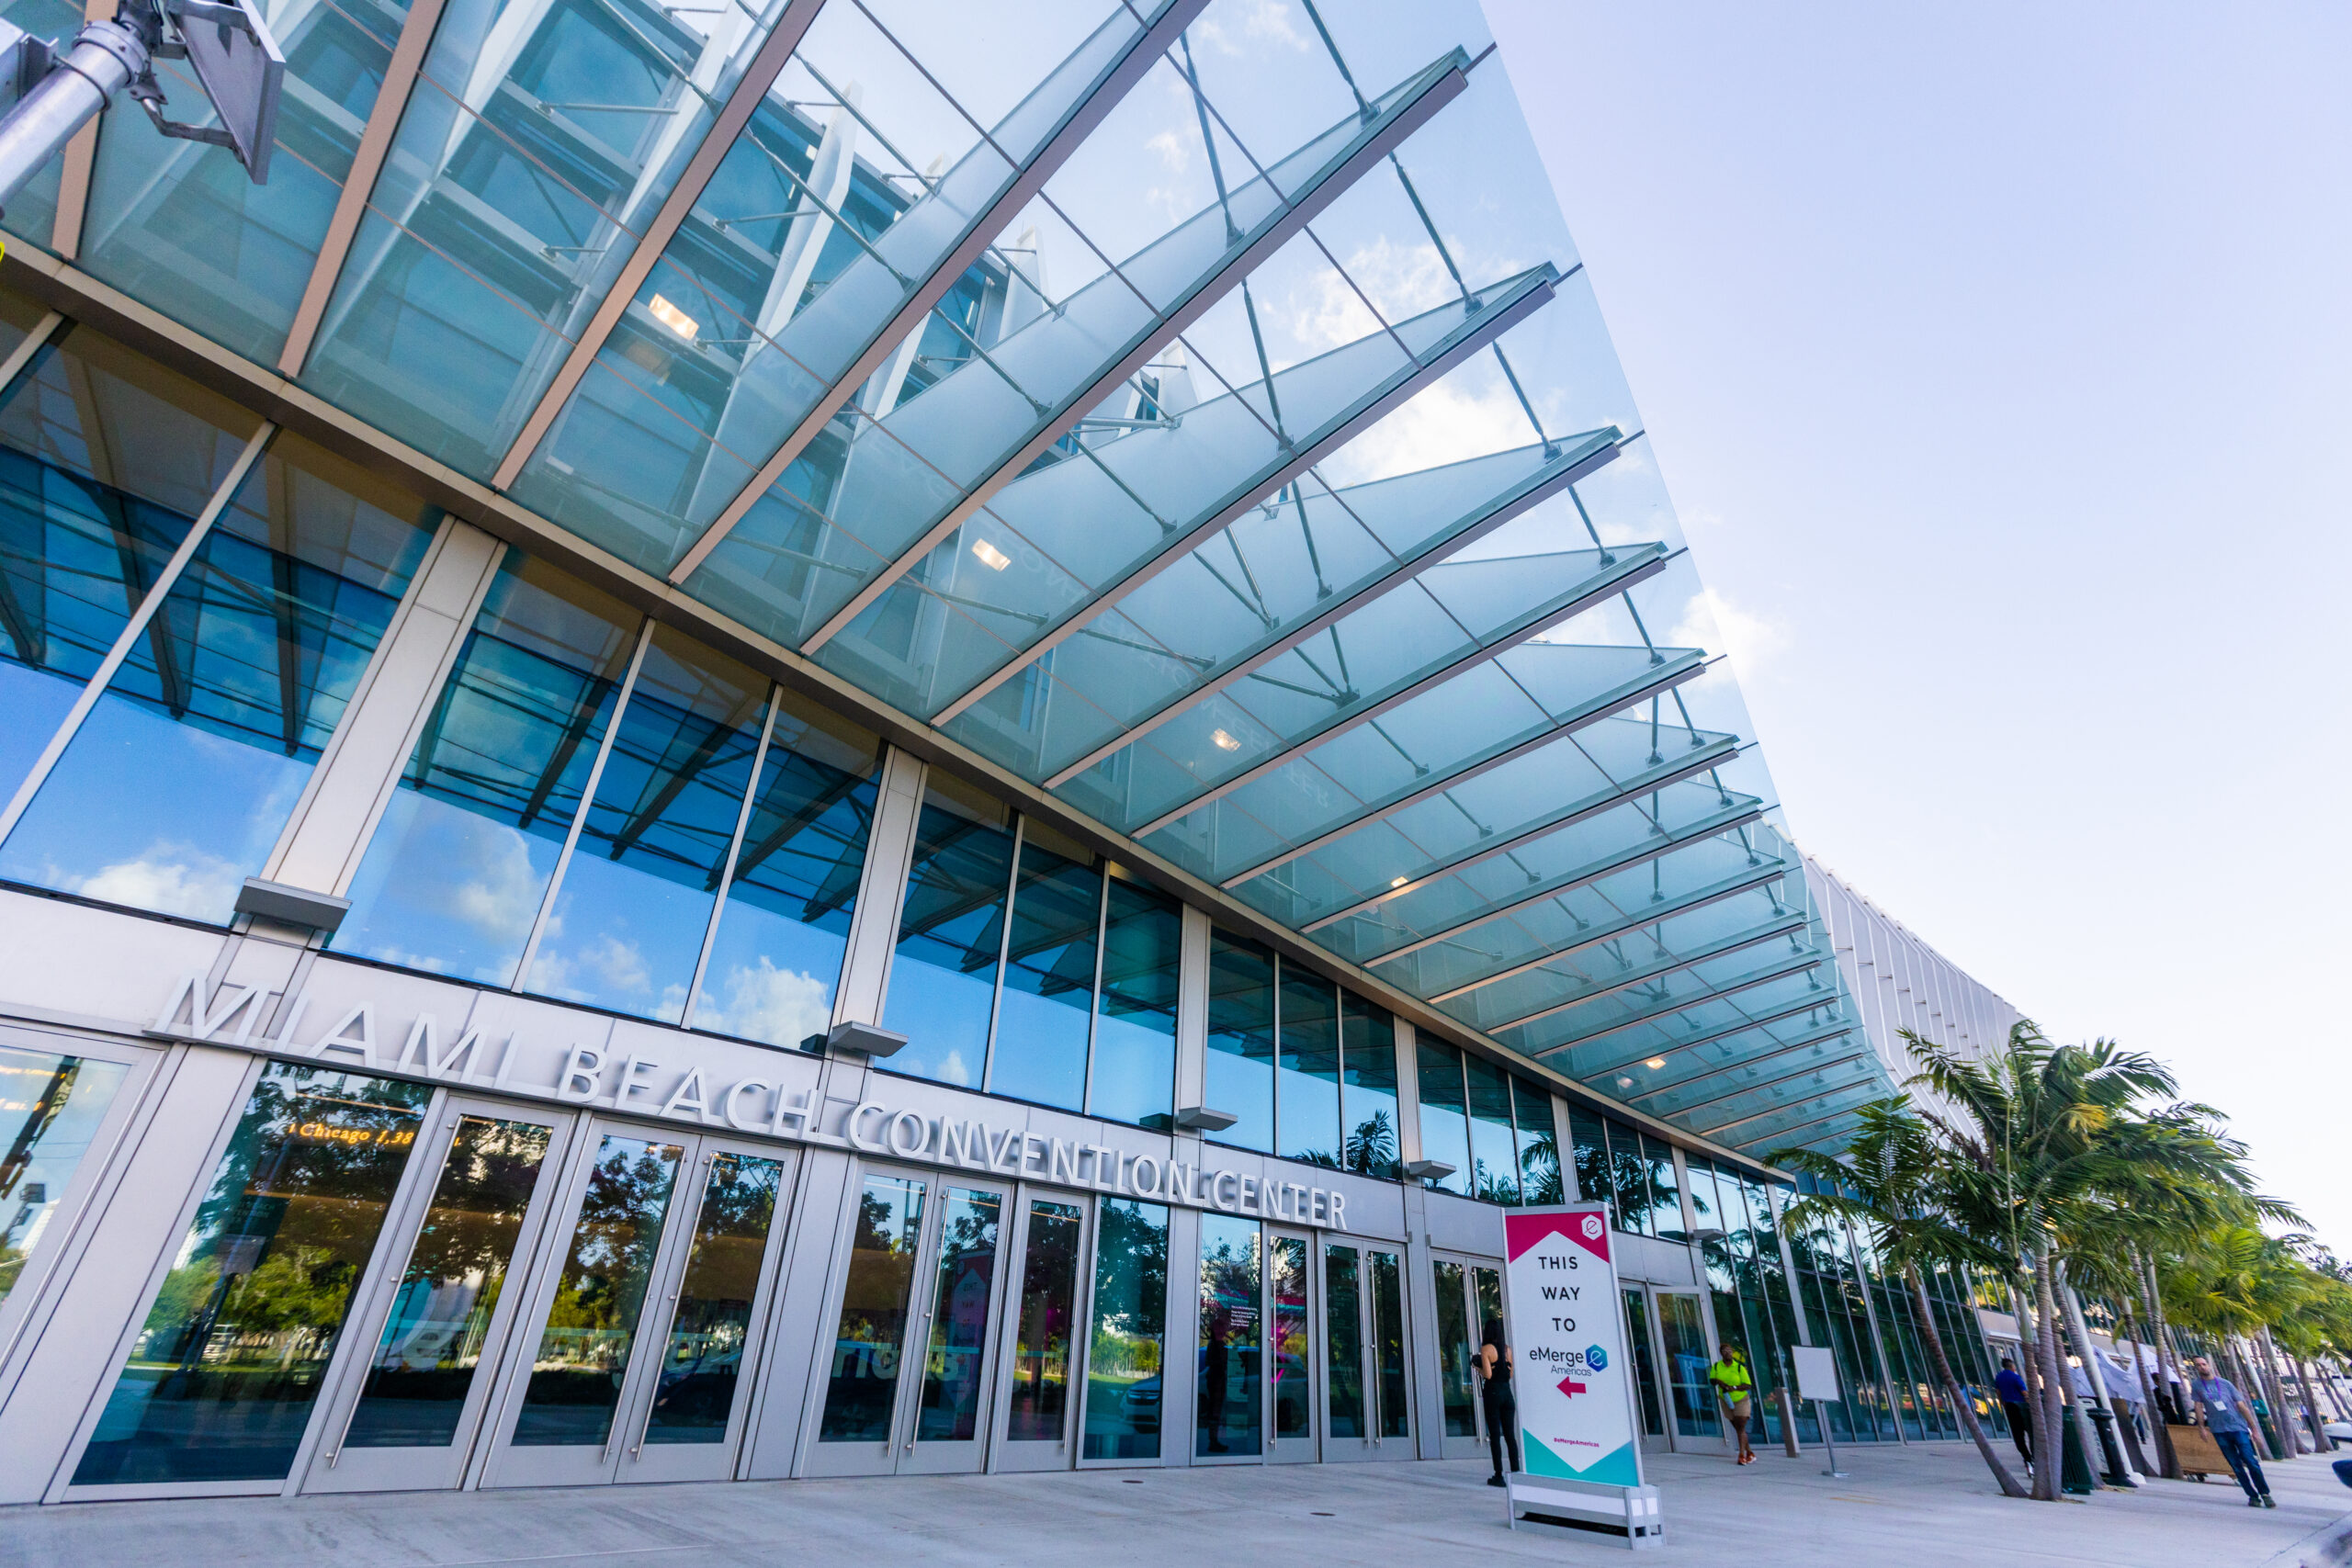 The convention center in Miami prepares for eMerge Americas.